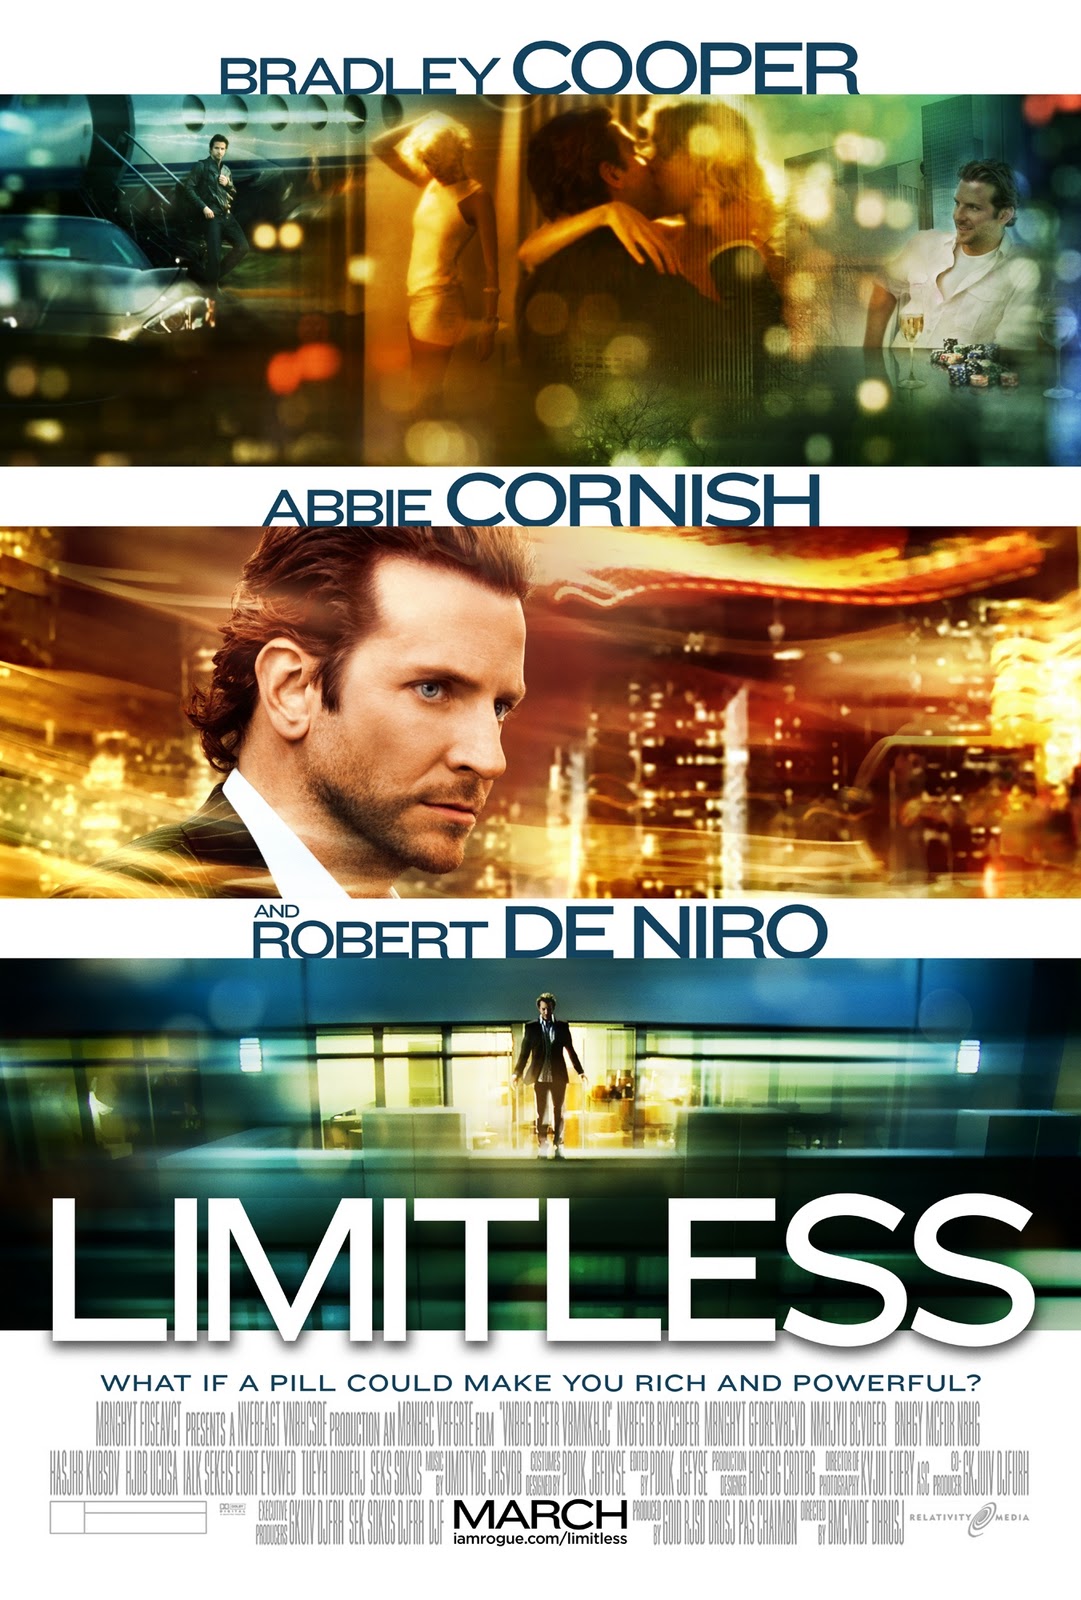 Limitless-Poster - We Are Movie Geeks